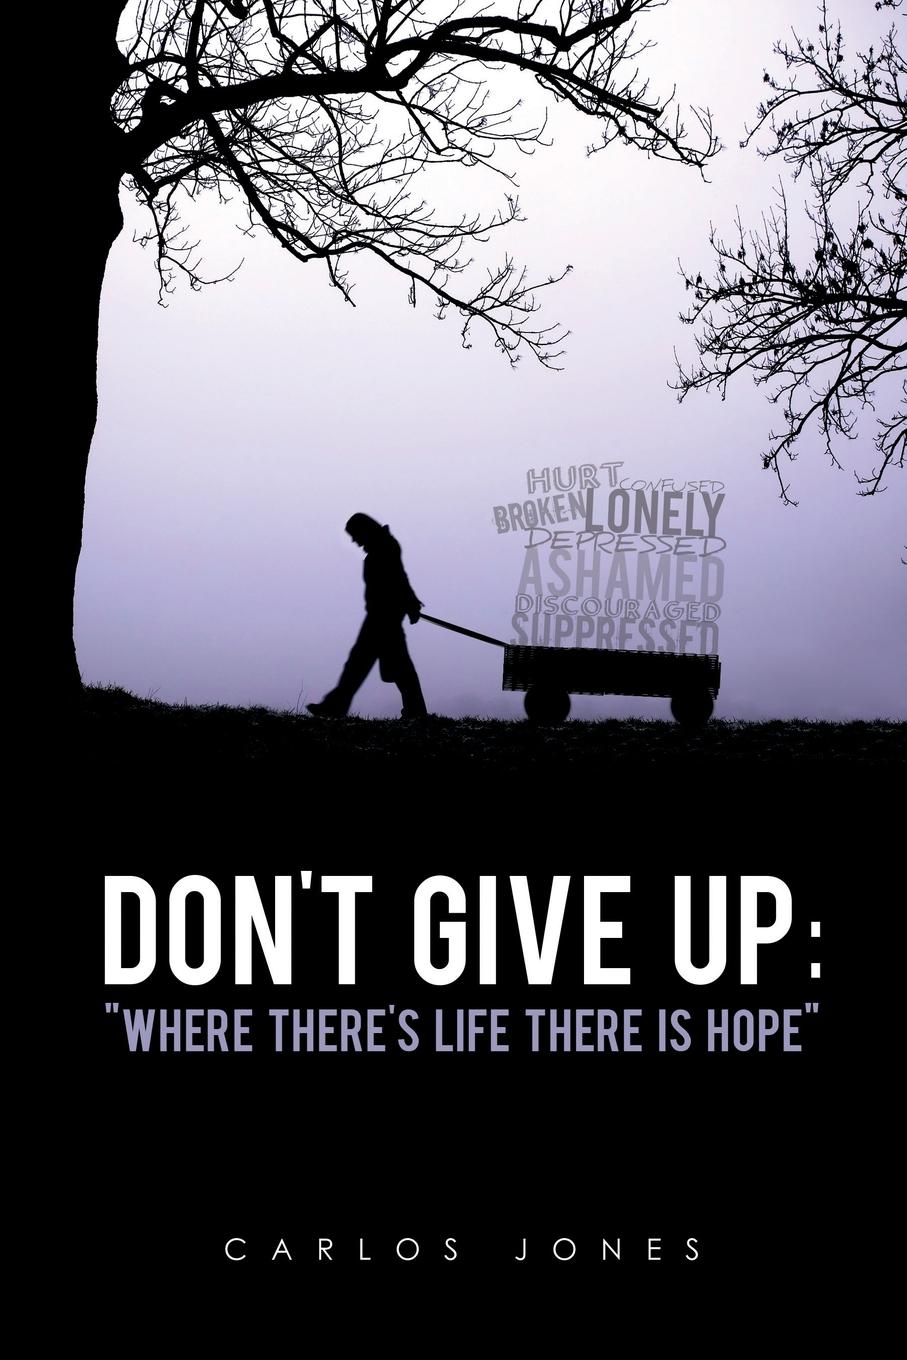 Донт гив ап. Give up. Don`t give up. I dont give up. Don't give up картинка.